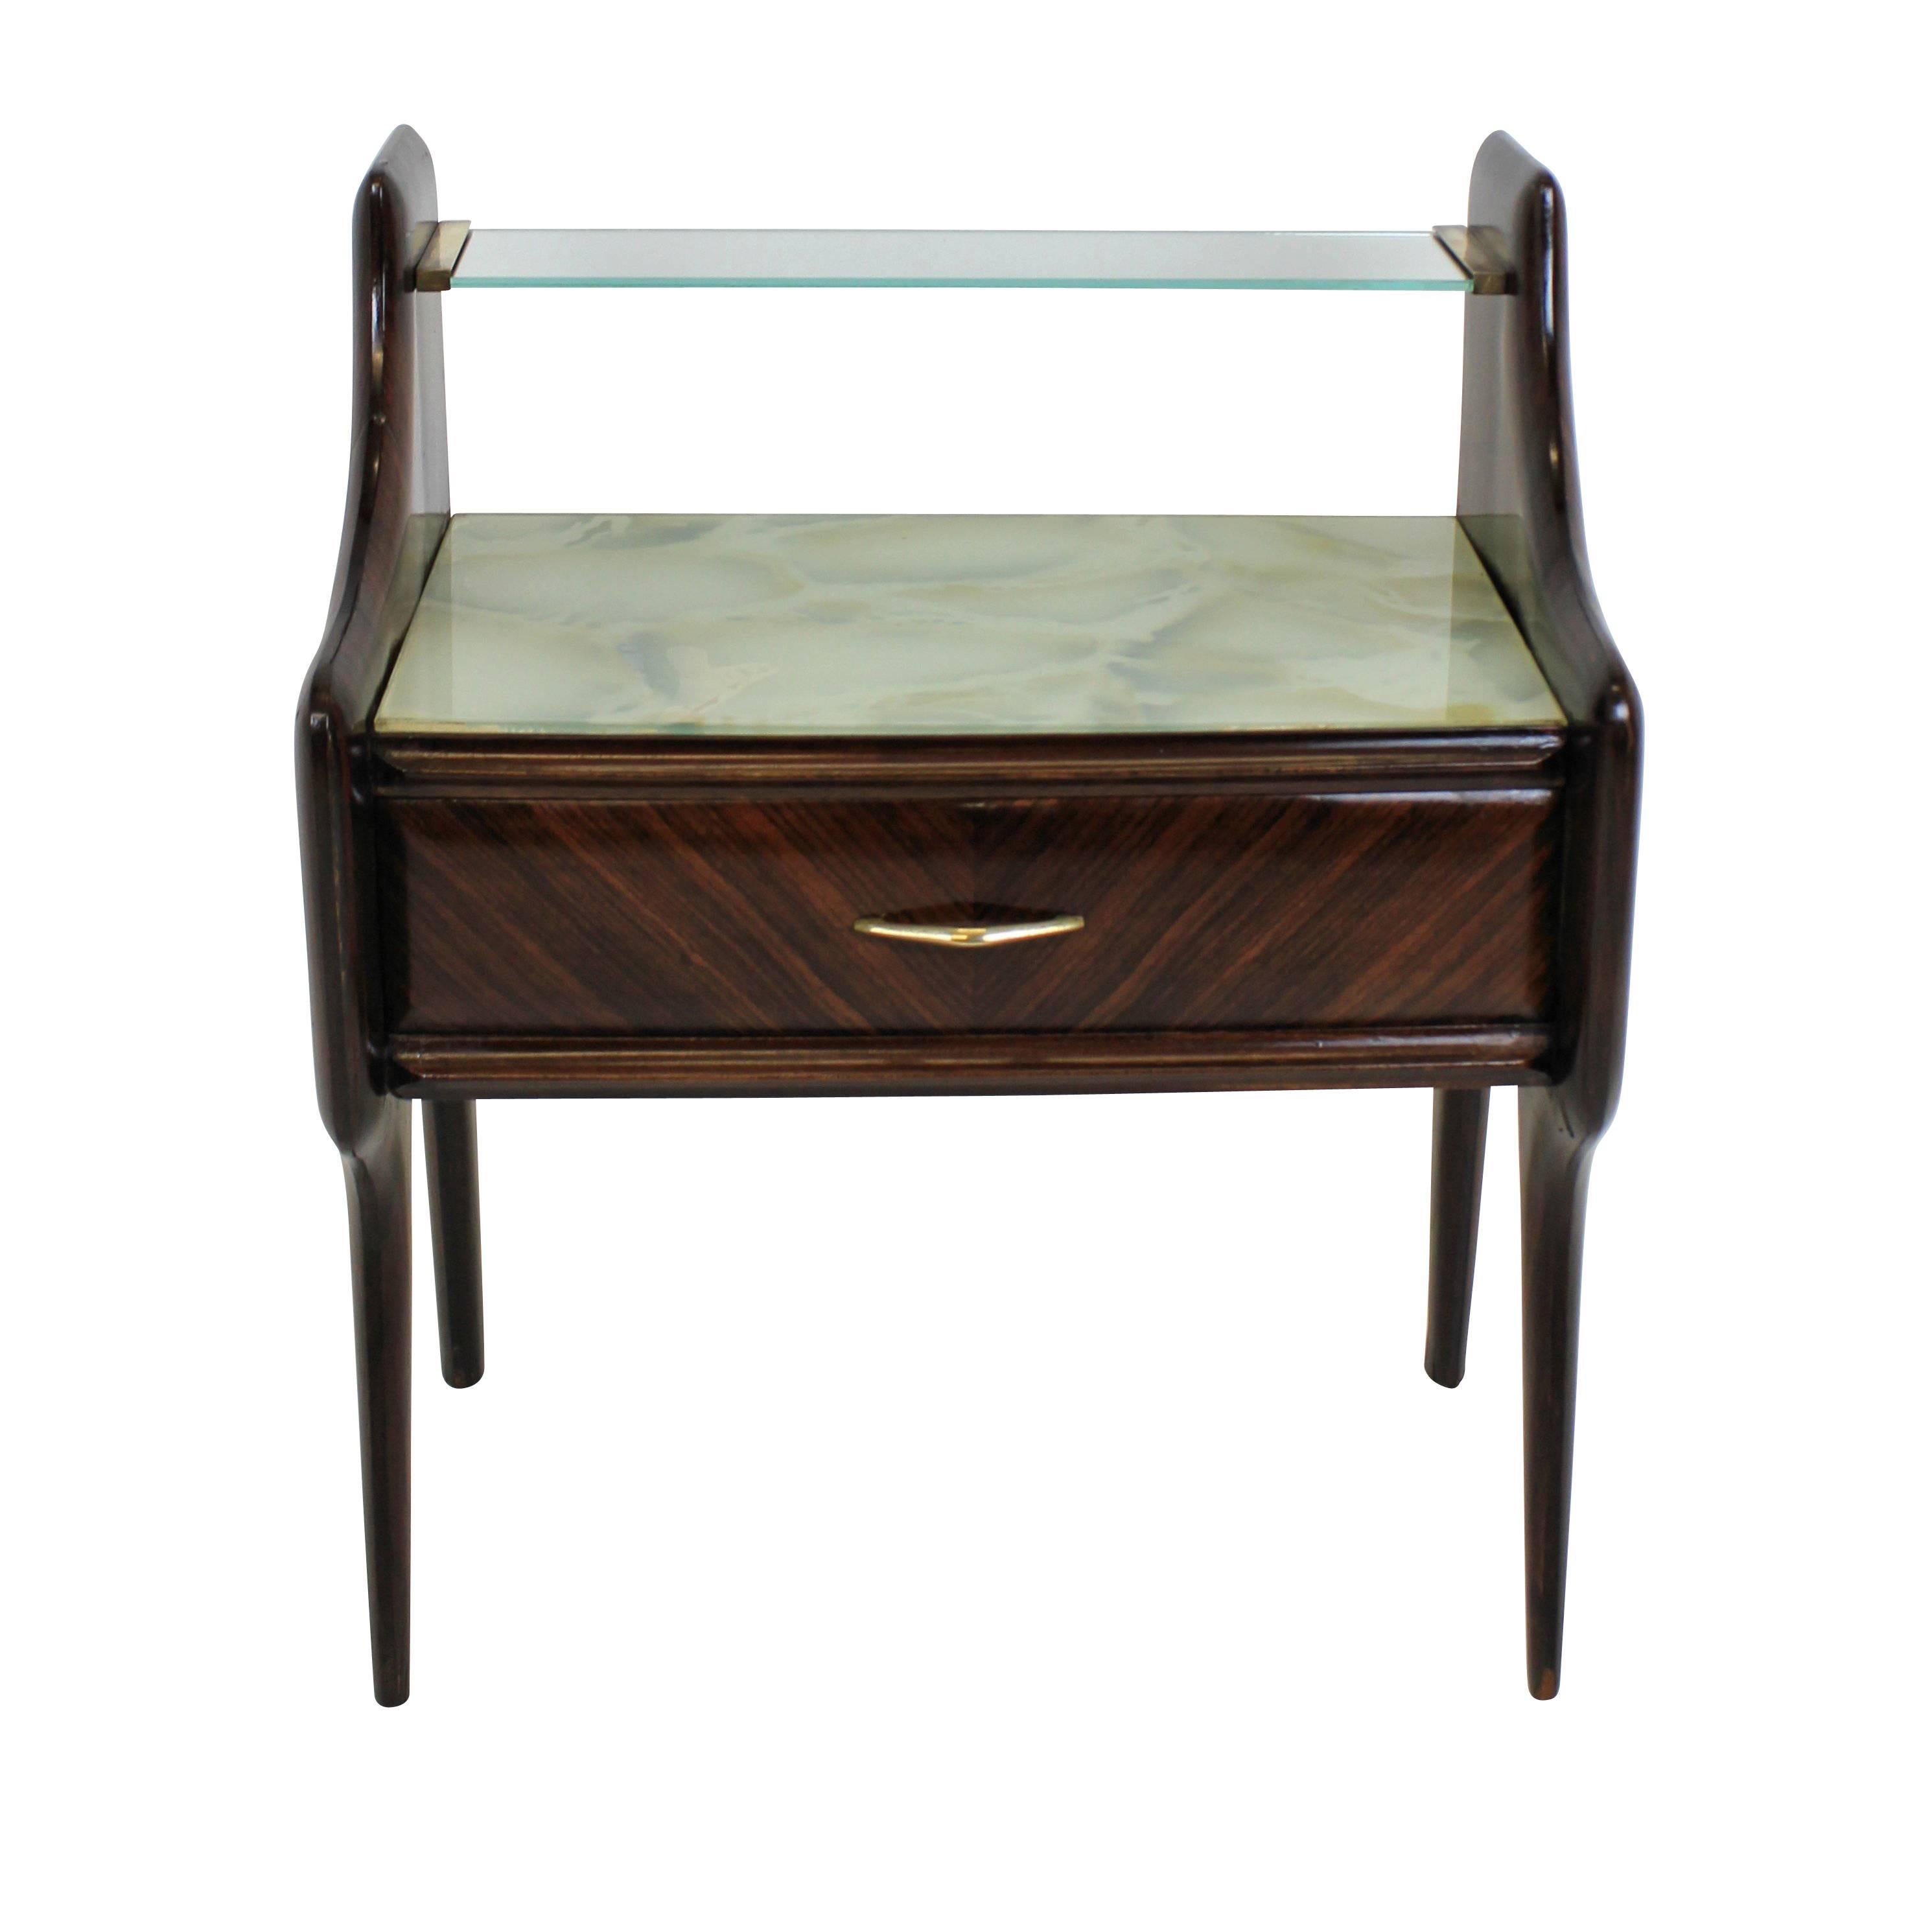 A pair of Italian Mid-Century nightstands in rosewood, with faux marble glass tops, a glass shelf and central drawer.